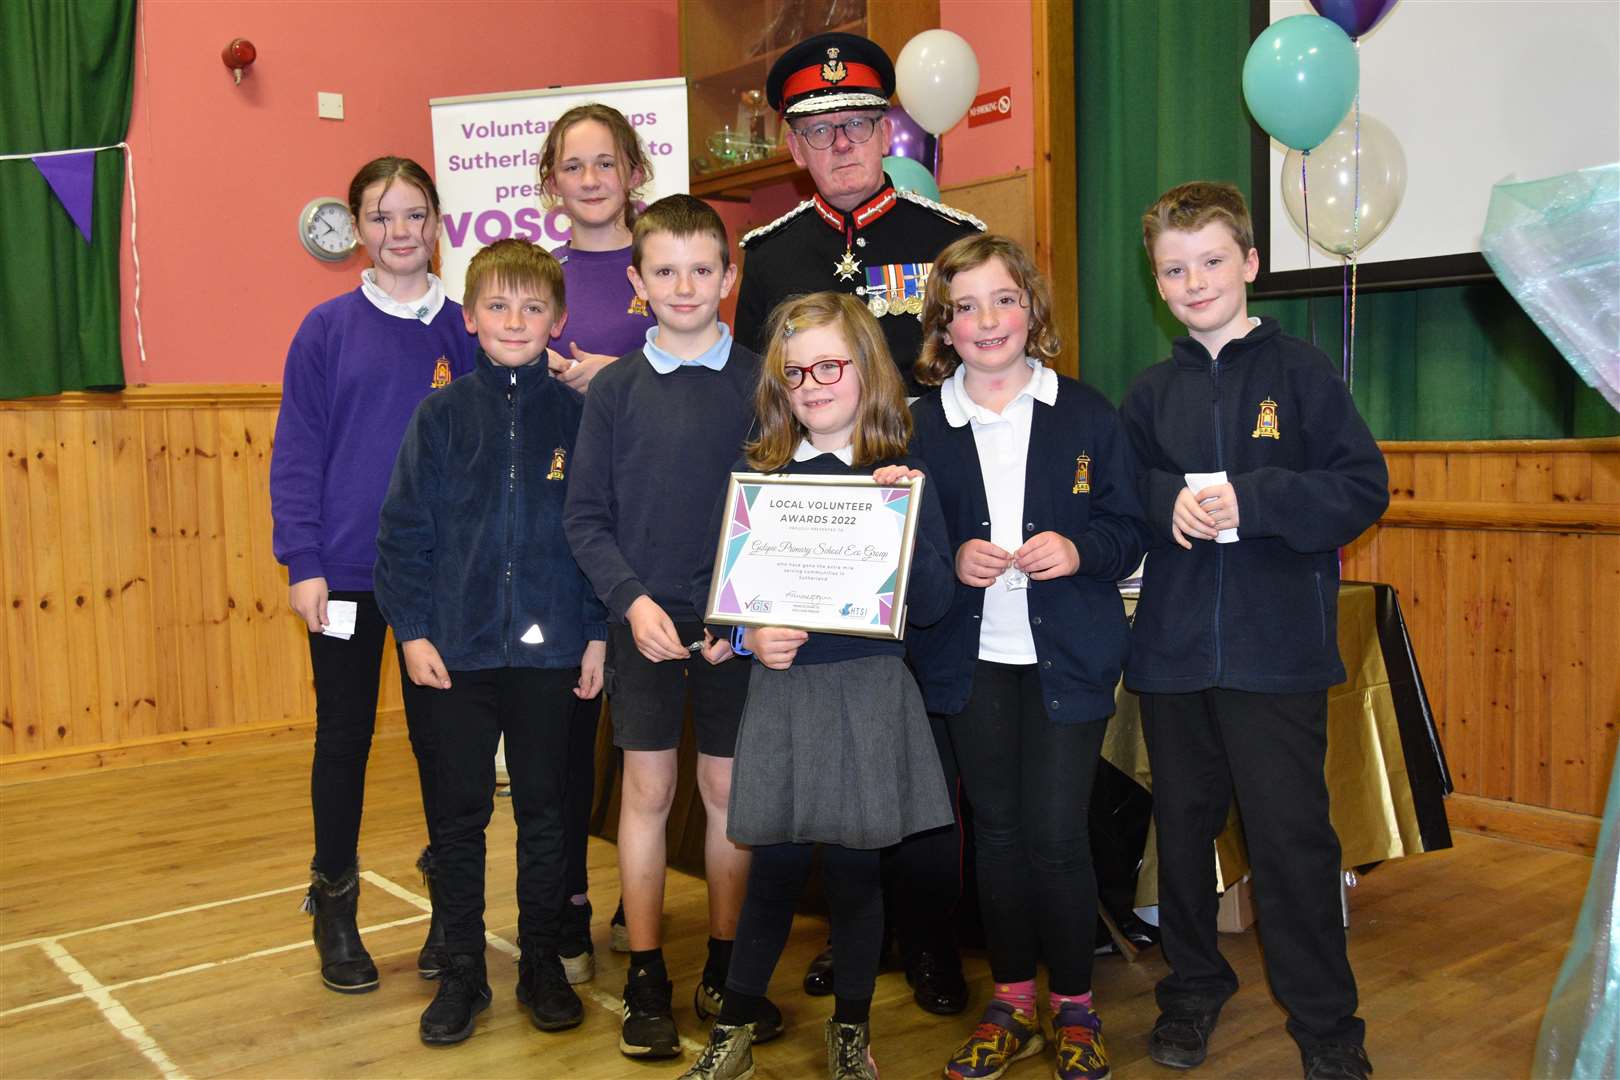 Golspie Primary School Eco Group with Major General Marriott, from left, Roisin Doogan, Casey Whyte, Poppy Shaw, Leo Lannon, Freya Port, Maria Morrison and Toby Sutherland.